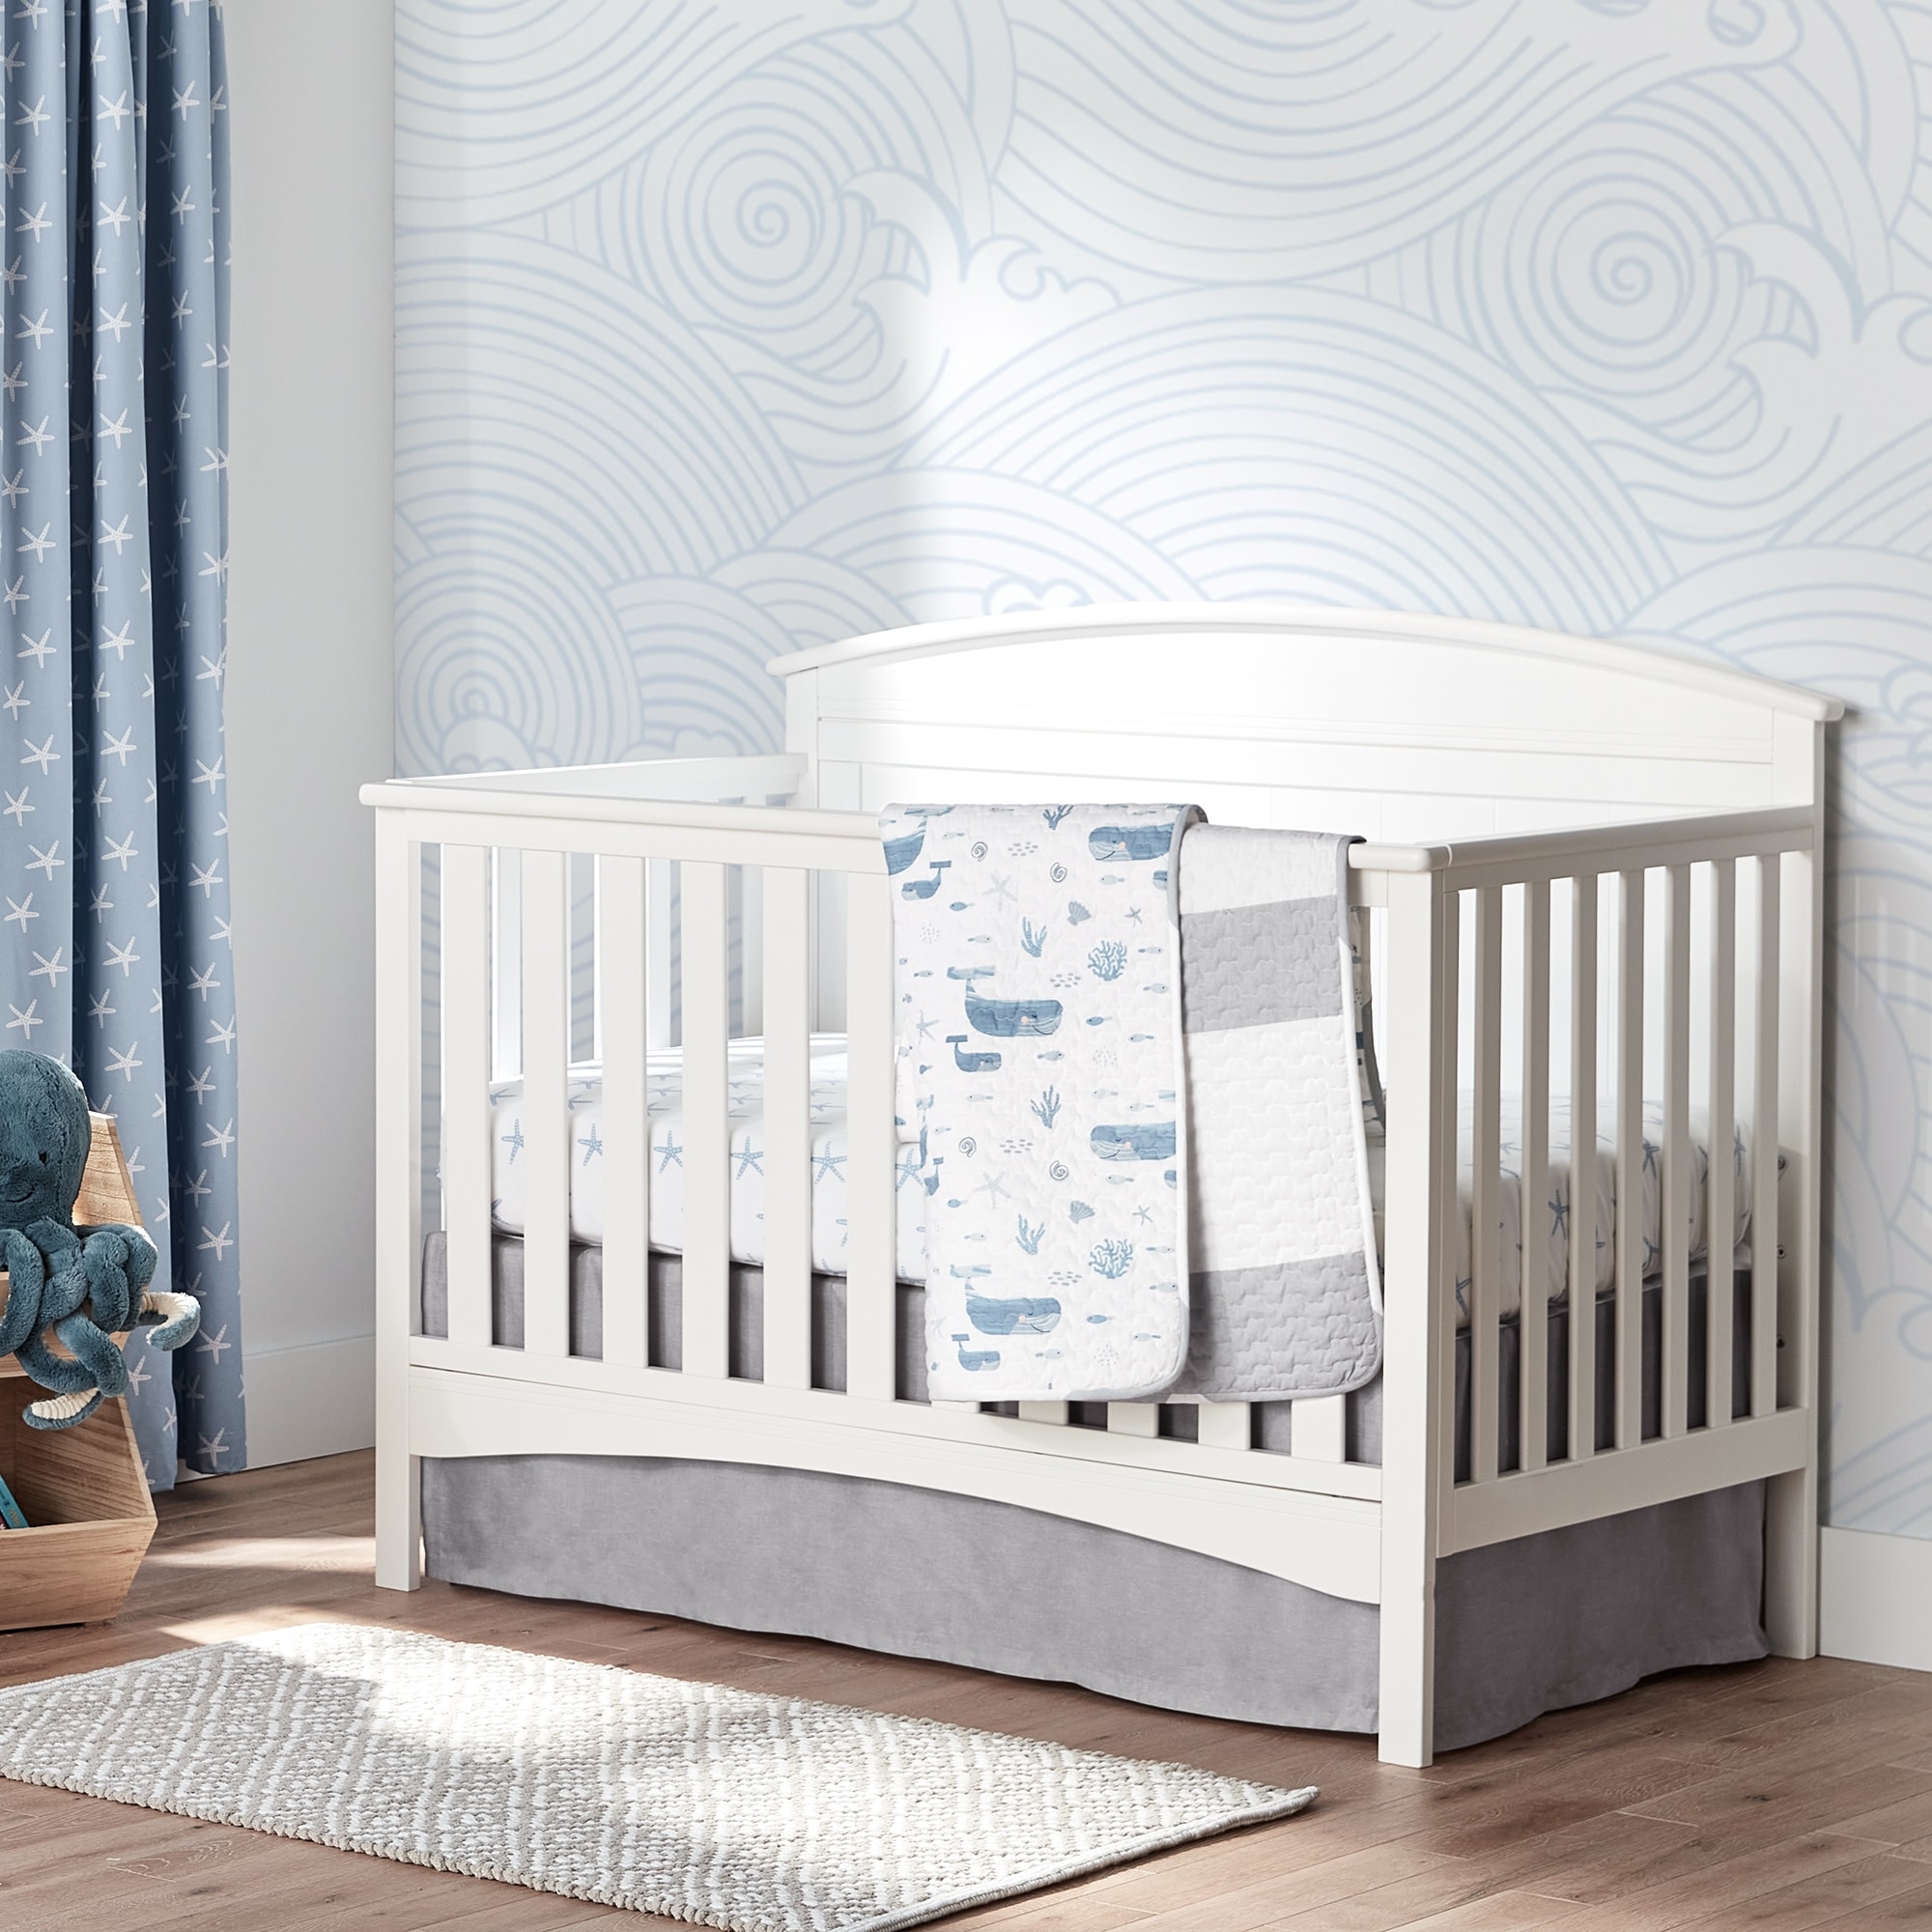 https://ak1.ostkcdn.com/images/products/is/images/direct/8a2c4ad28bbf3febd4c212503c6246c7e5768d6f/Lush-Decor-Baby-Seaside-Starfish-Organic-Cotton-Fitted-Crib-Sheet%2C-2-Pack.jpg